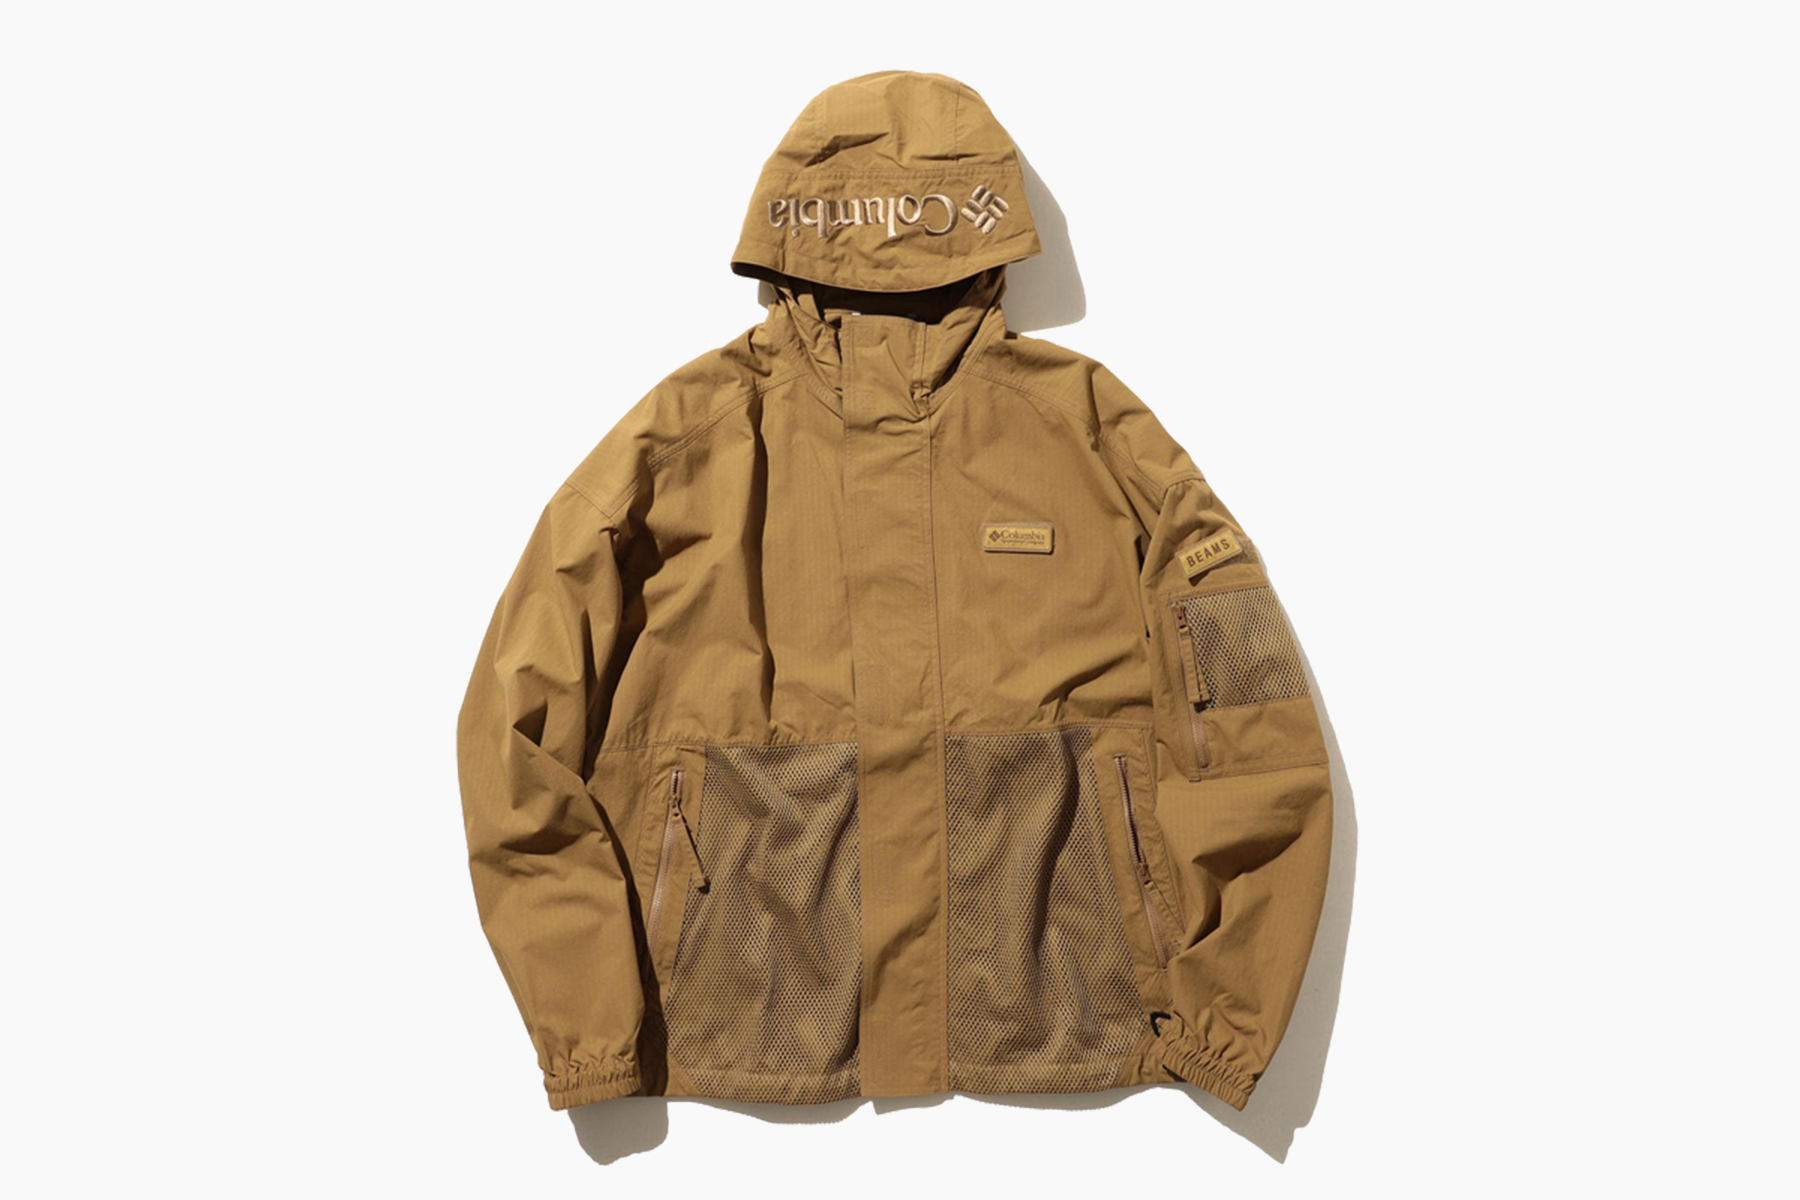 BEAMS x Columbia New Archive-Inspired Collab